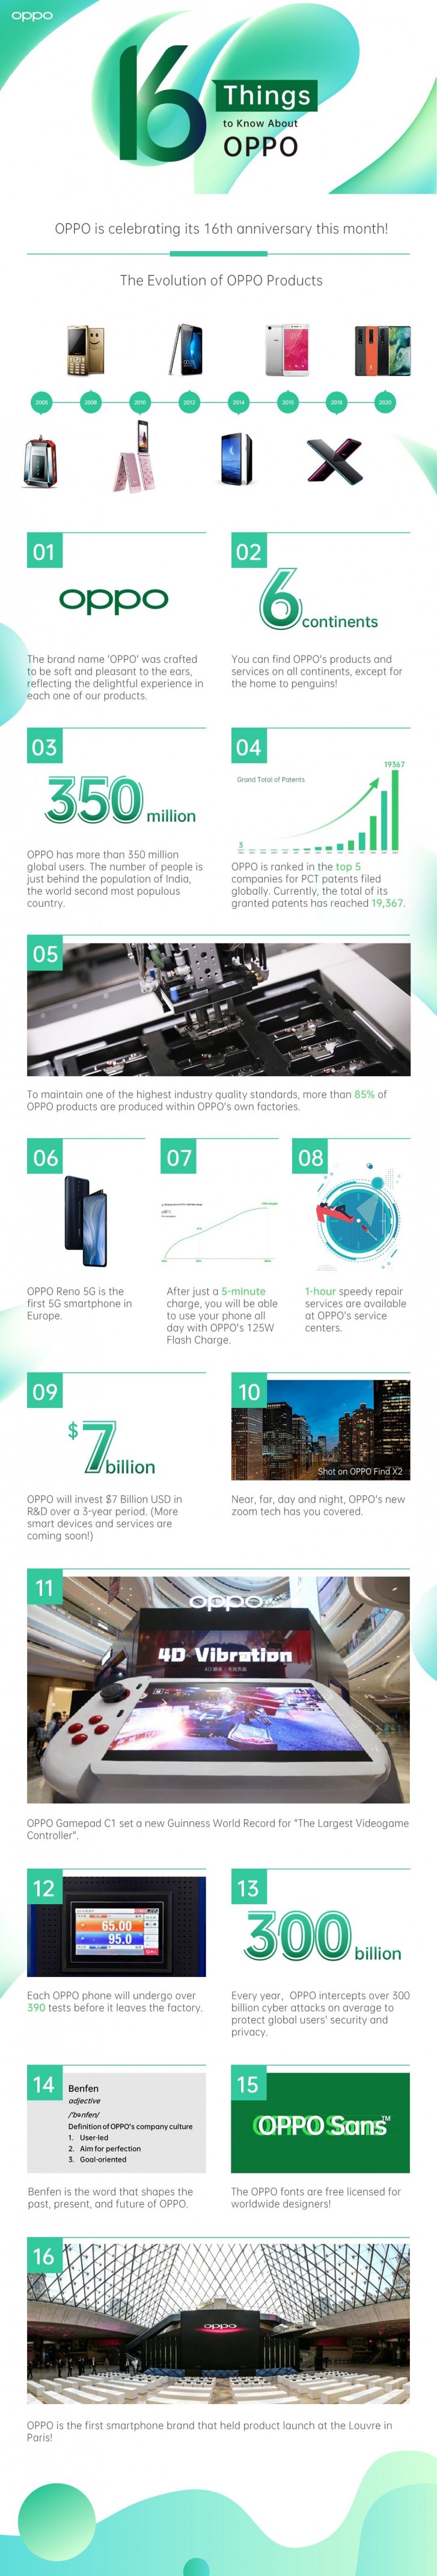 Oppo turns 16, reflects on the road it took and growing global footprint 